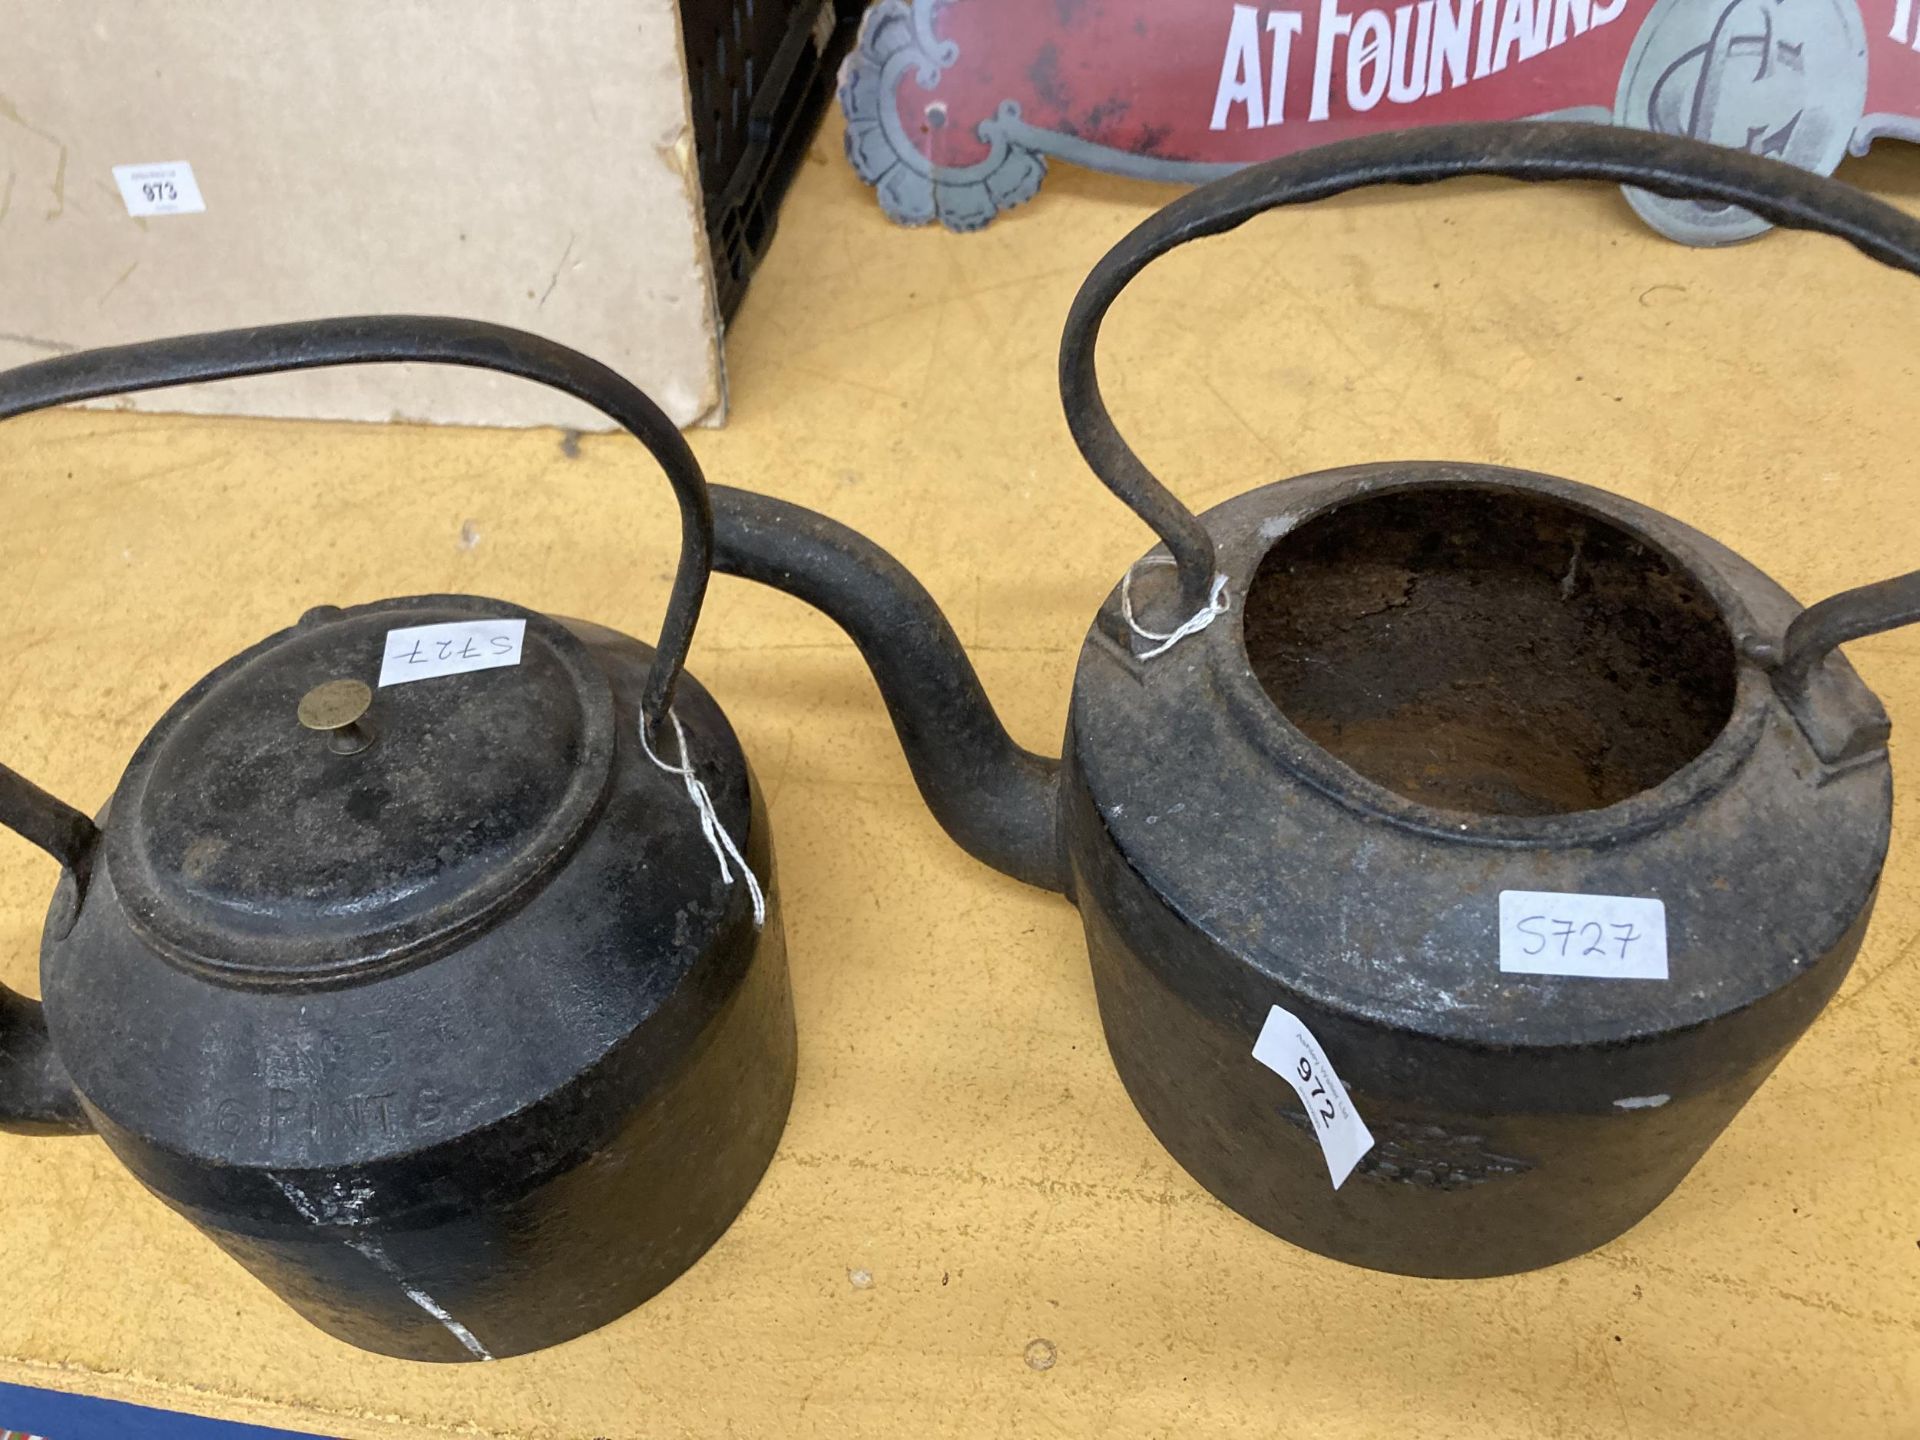 TWO VINTAGE CAST IRON KETTLES - ONE WITH MISSING LID - Image 7 of 8